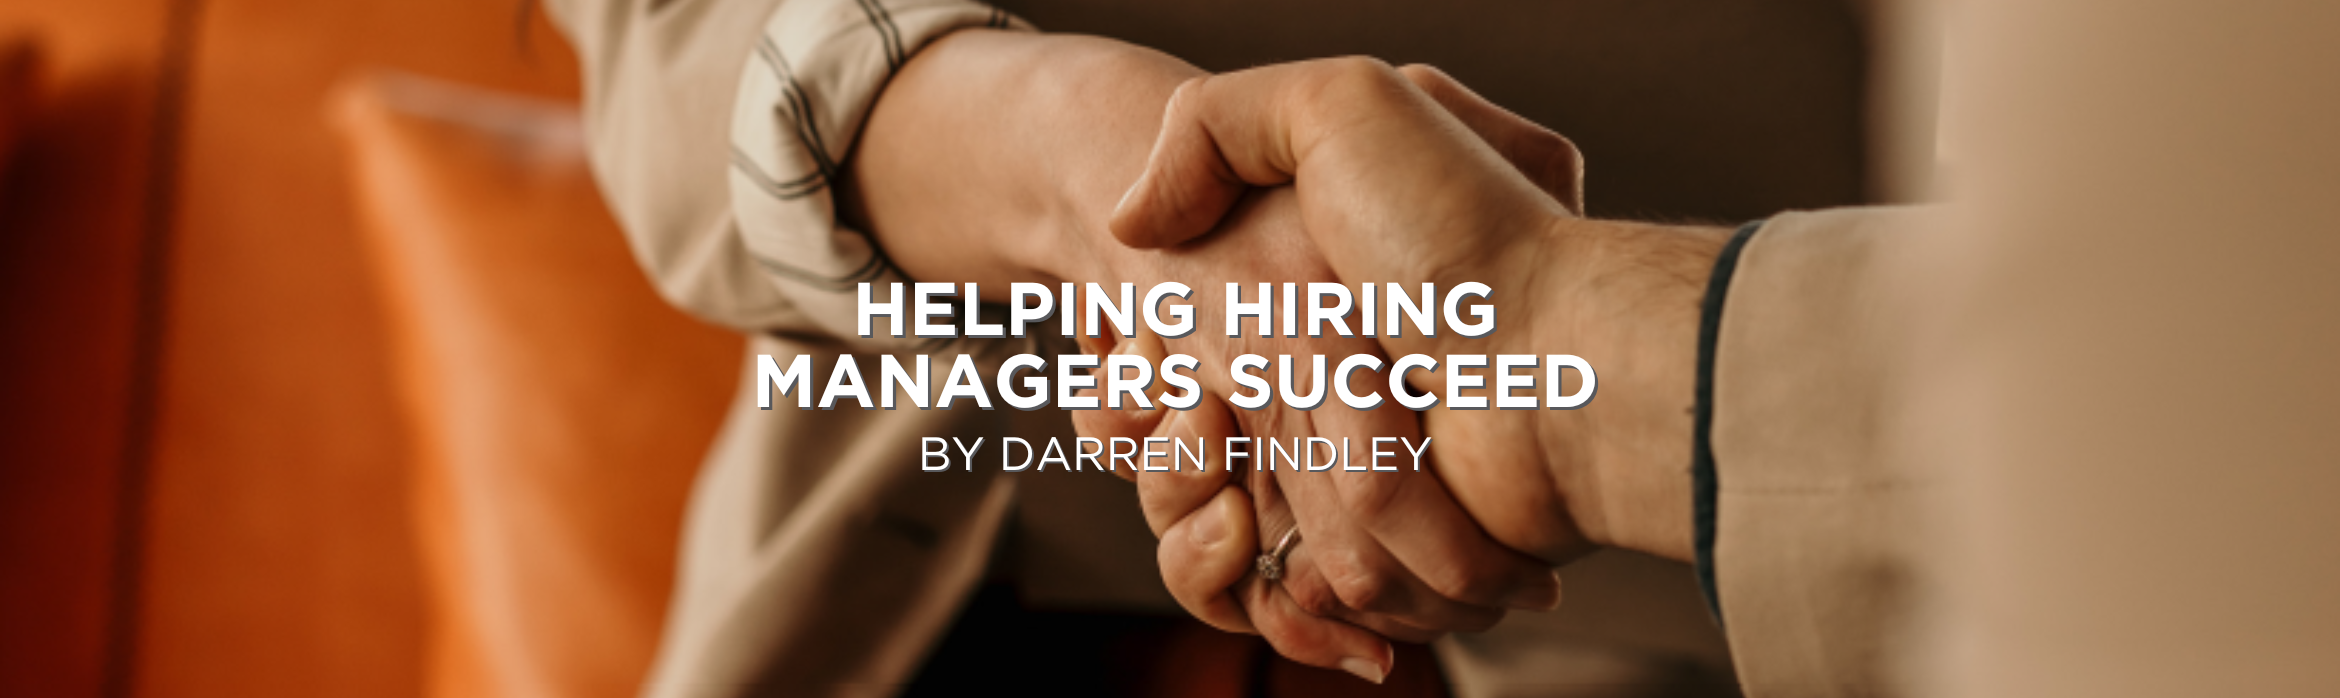 Helping Hiring Managers Succeed